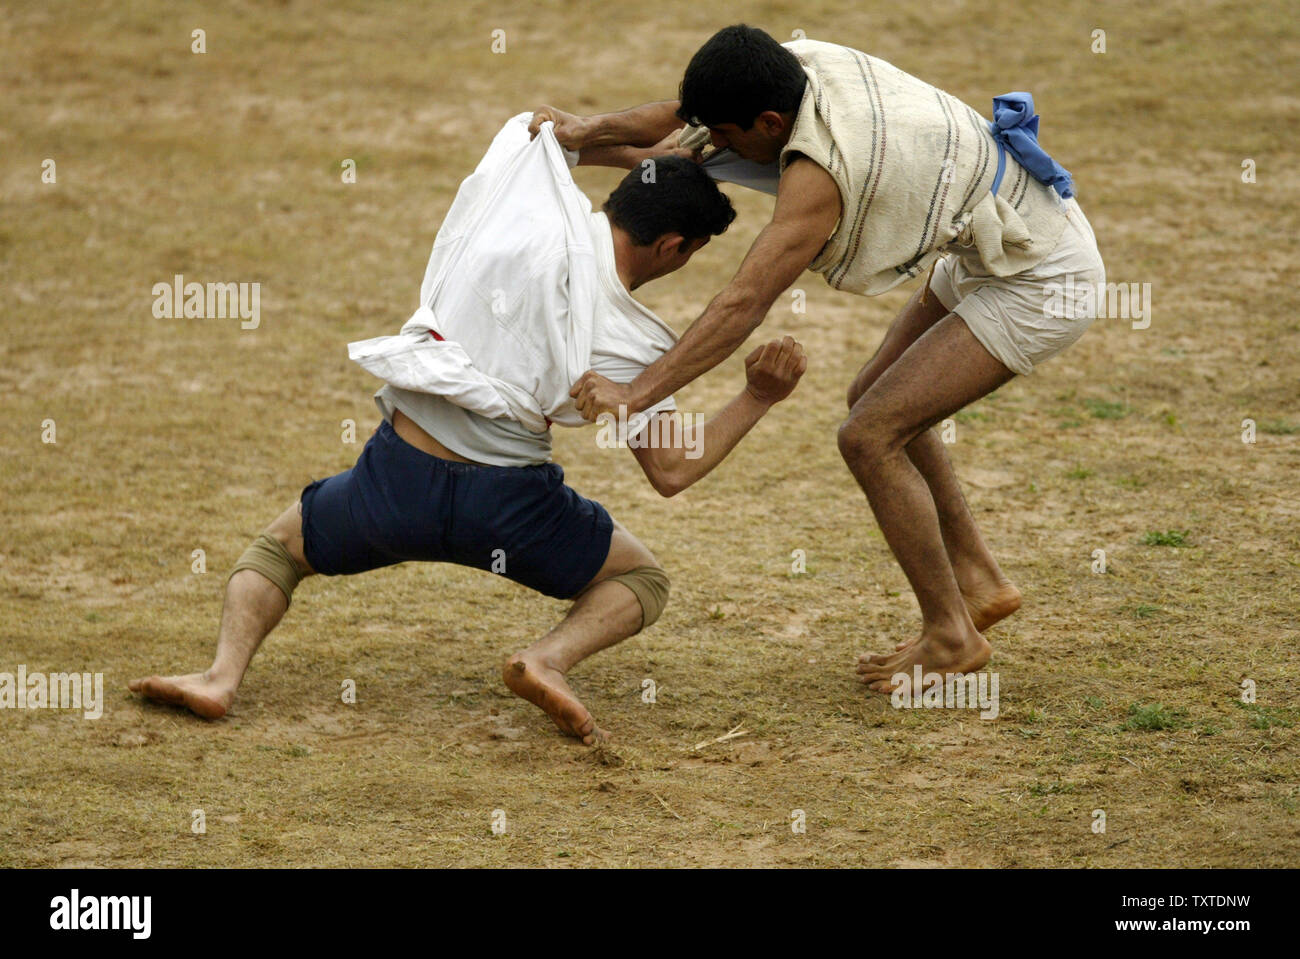 Iranian wrestlers fight during a traditional form of wrestling called Bachokheh on the last day of Nowrouz being held for over 100 years in the city of Esfarayen in north Khorasan province 733Km (425 miles) northeast of Tehran on April 5, 2007. (UPI Photo) Stock Photo